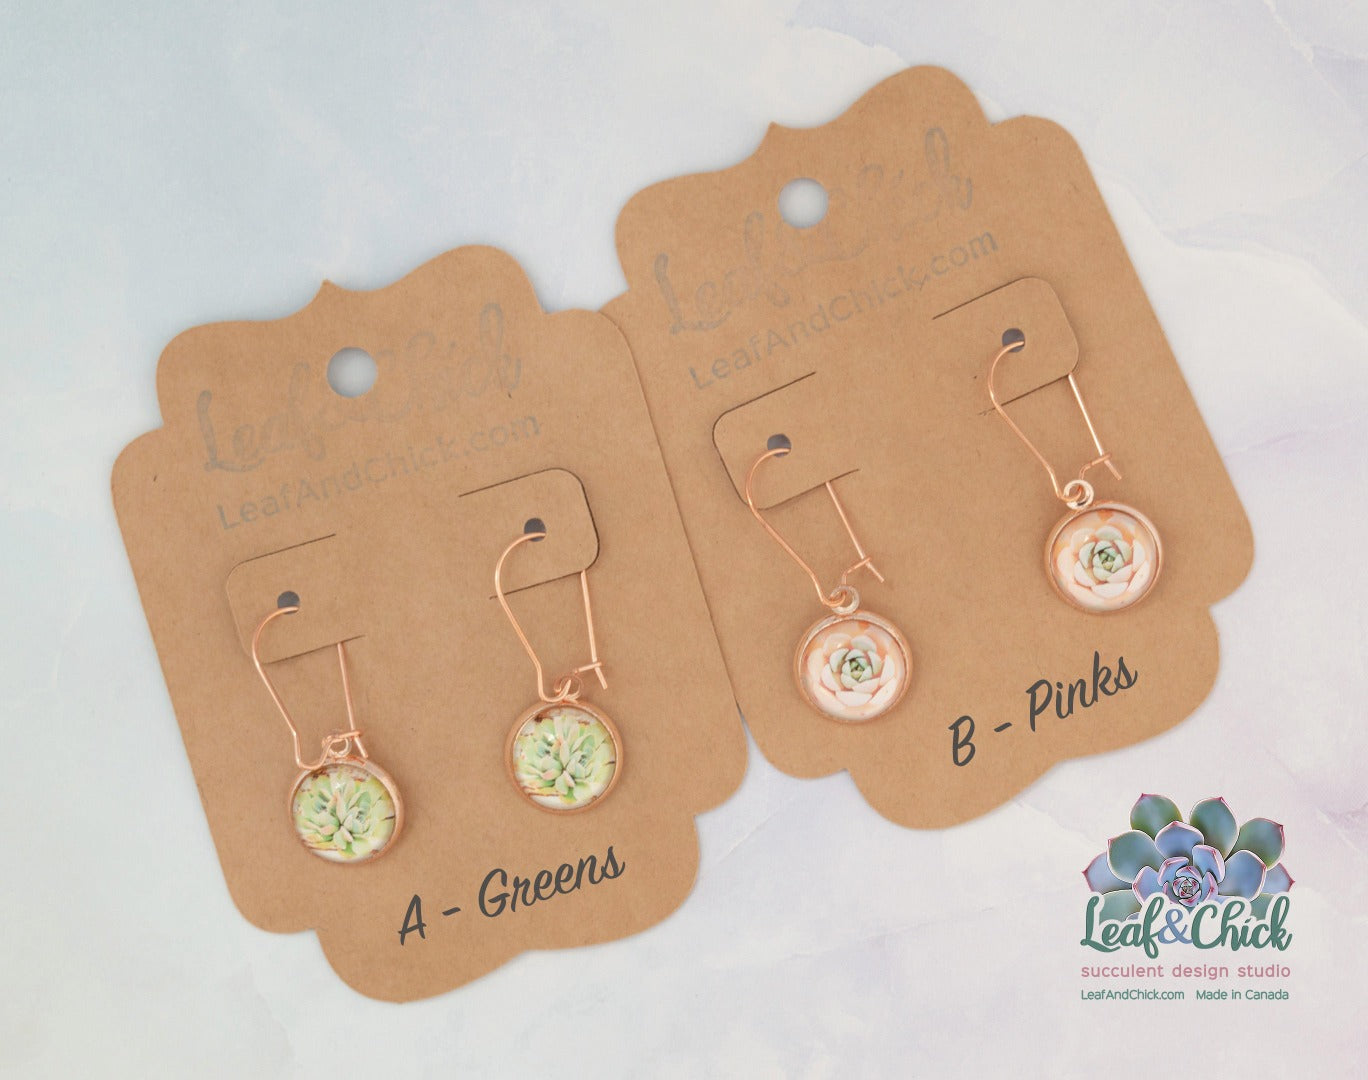 two styles of rose gold succulent earrings labelled A- greens, B- pinks